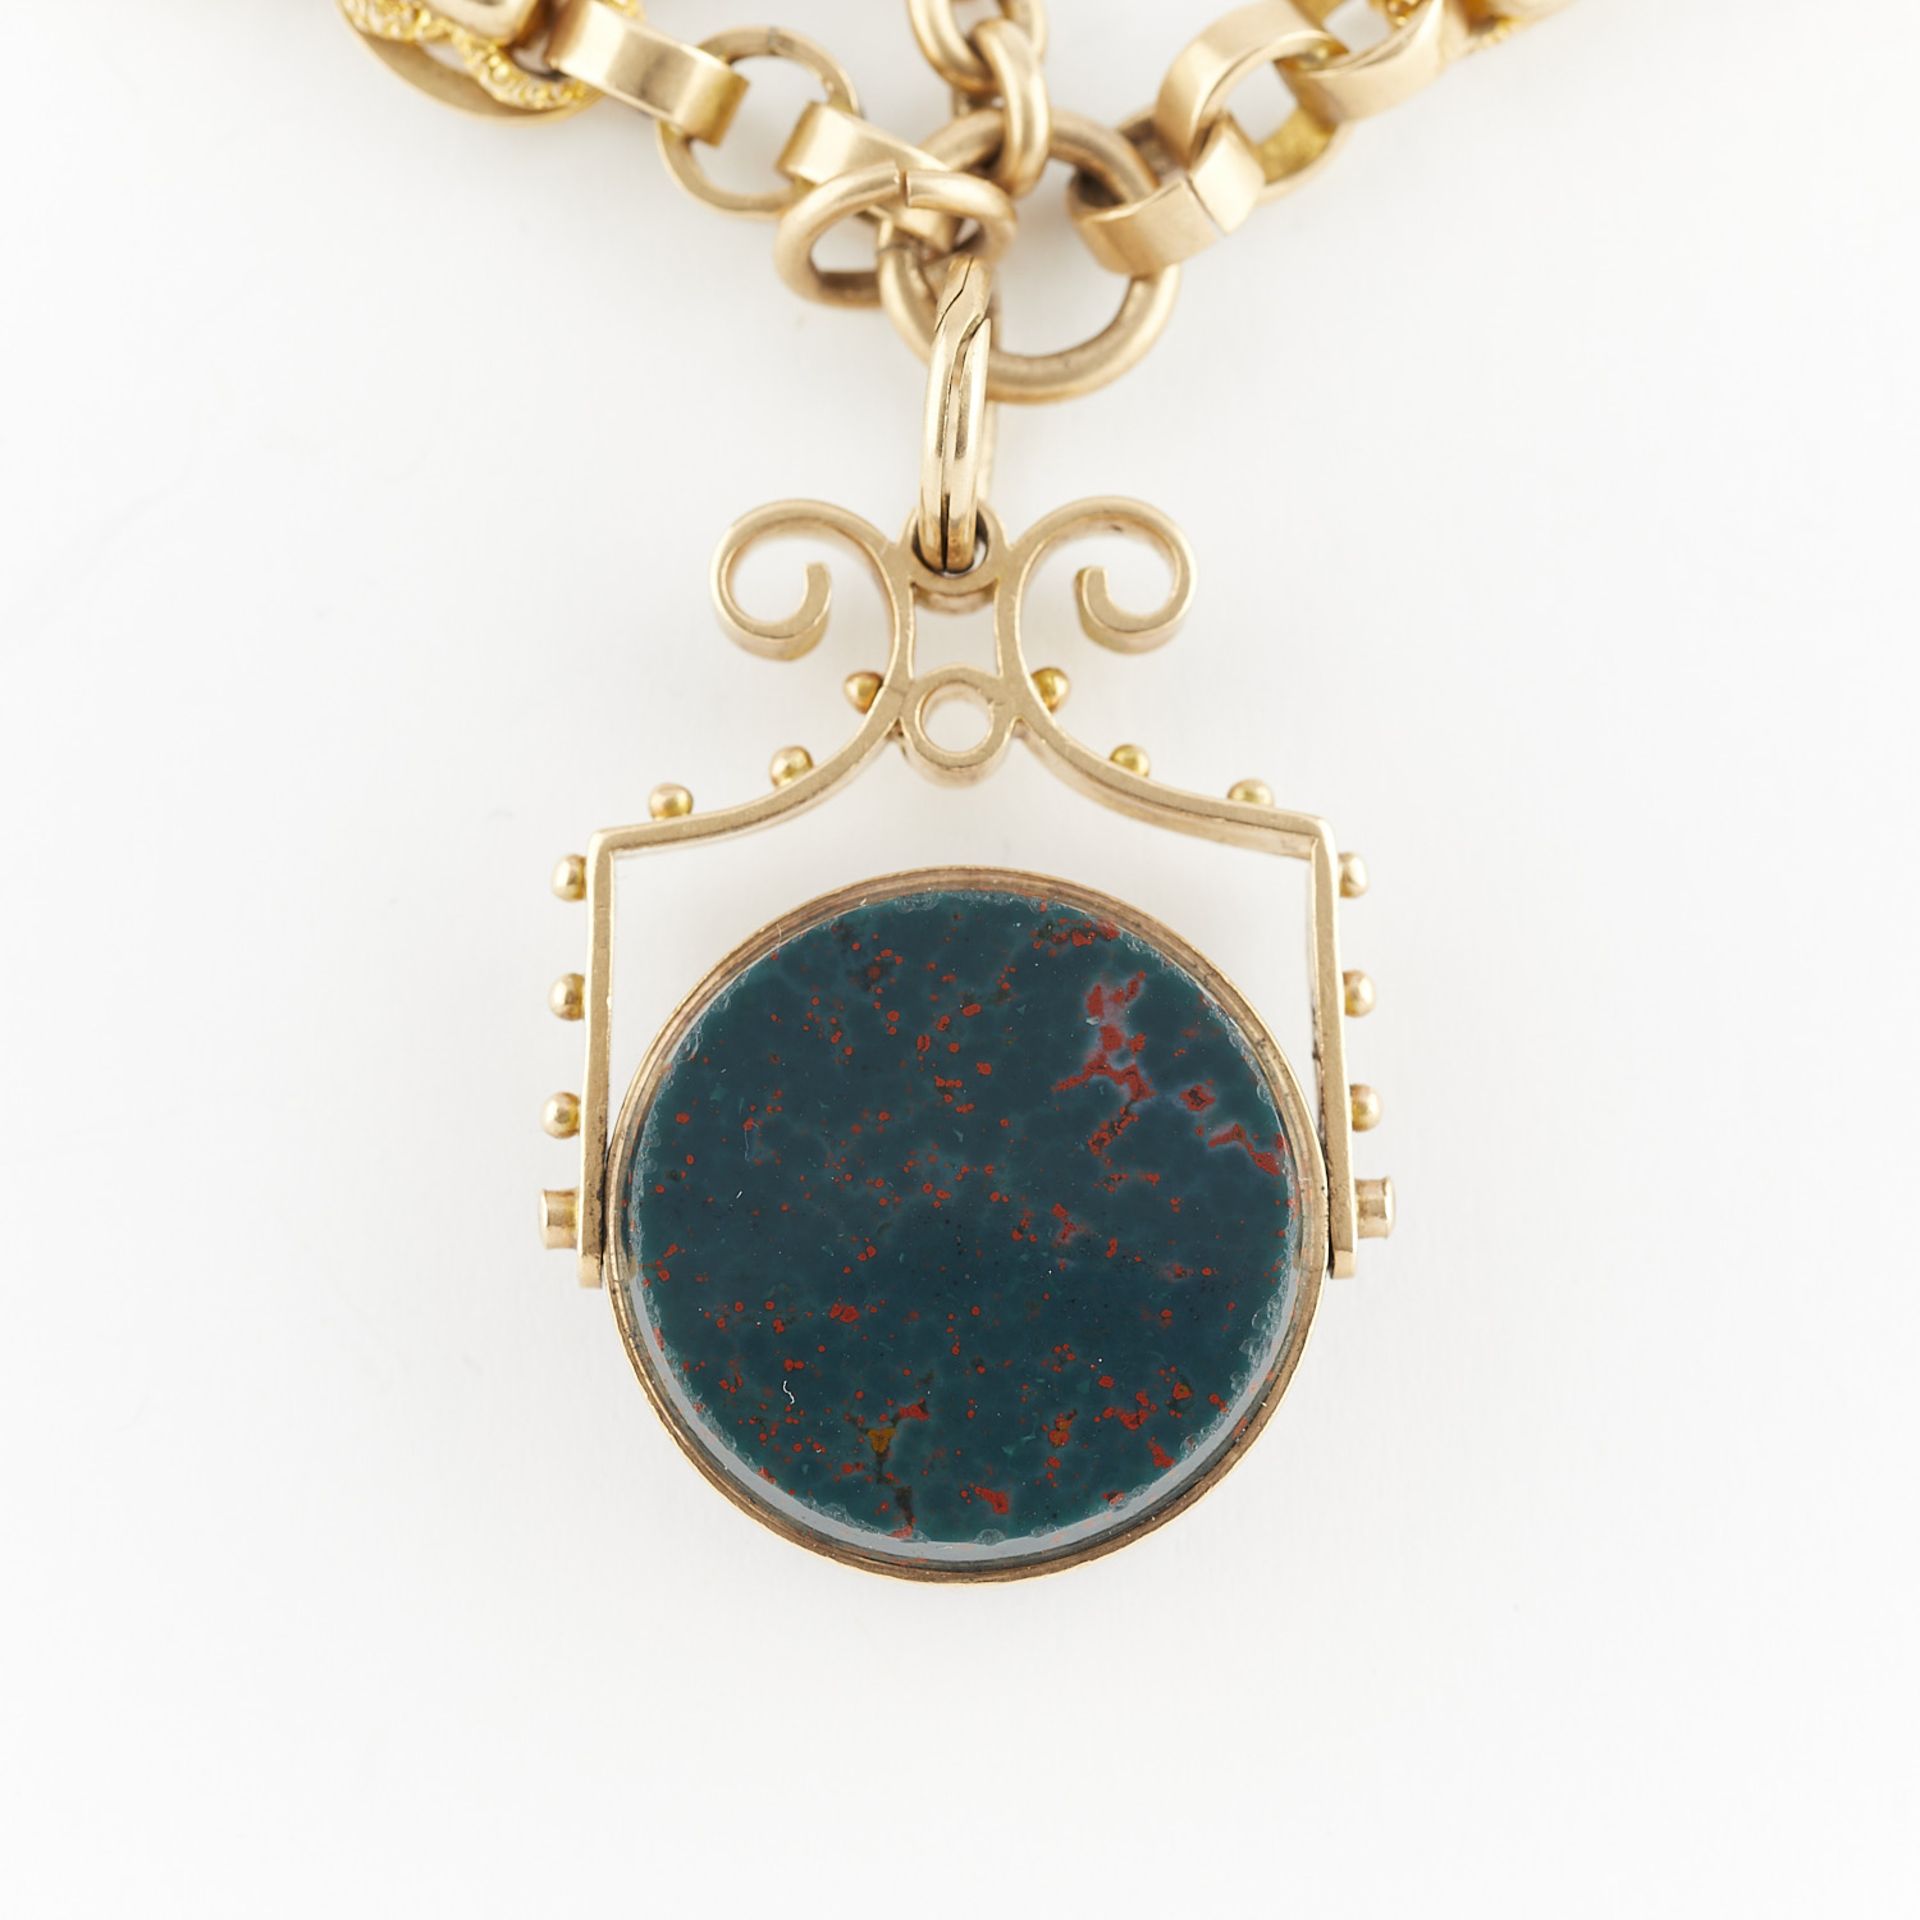 14k Gold Filled Watch Chain & Fob w/ Bloodstone - Image 5 of 6